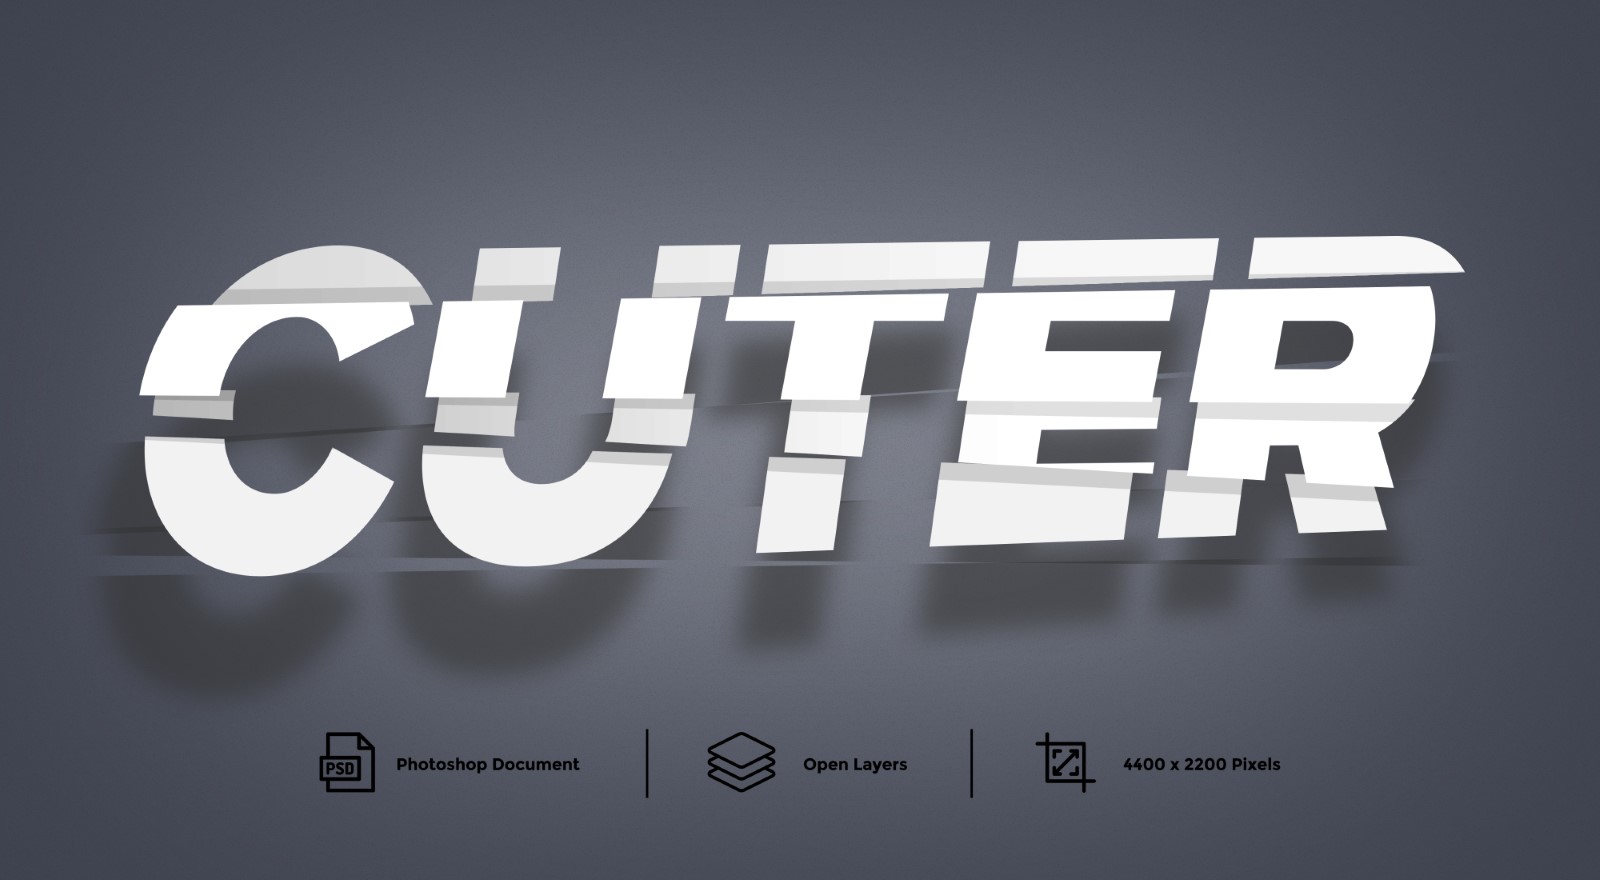 Cutting Text Effect Layer Style - Illustration